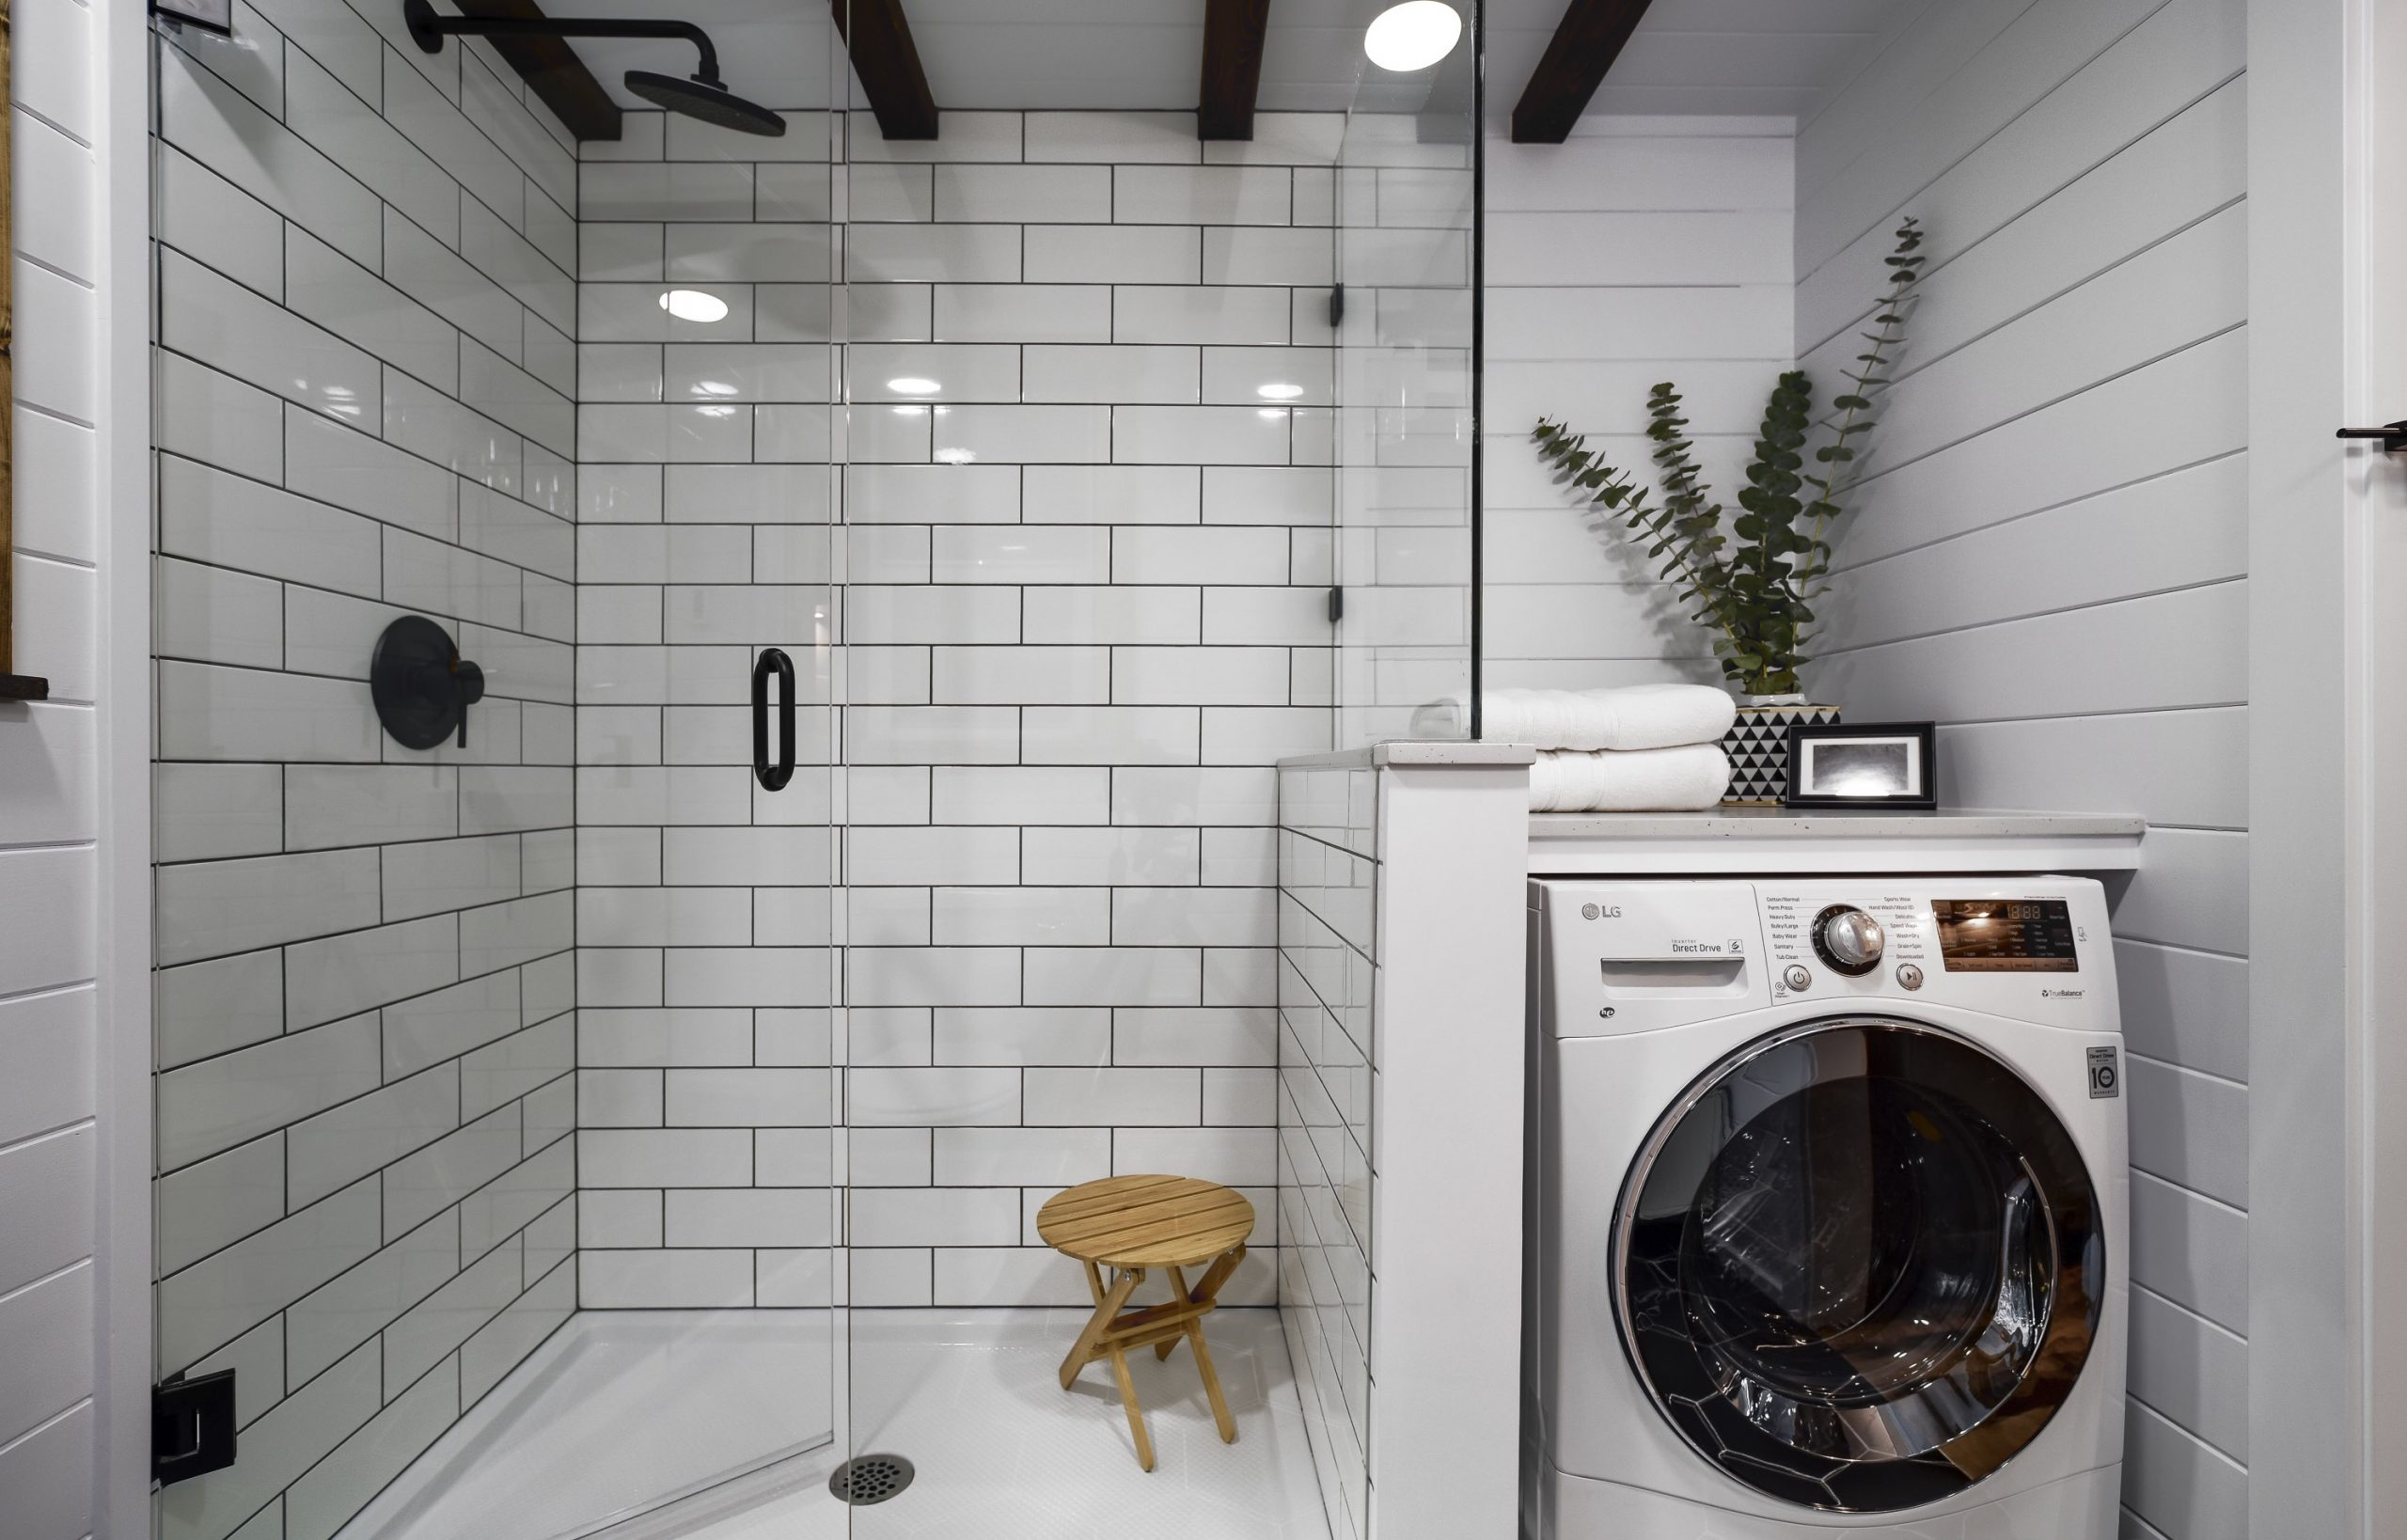 the shower in the loft tiny house is quite large for a tiny house